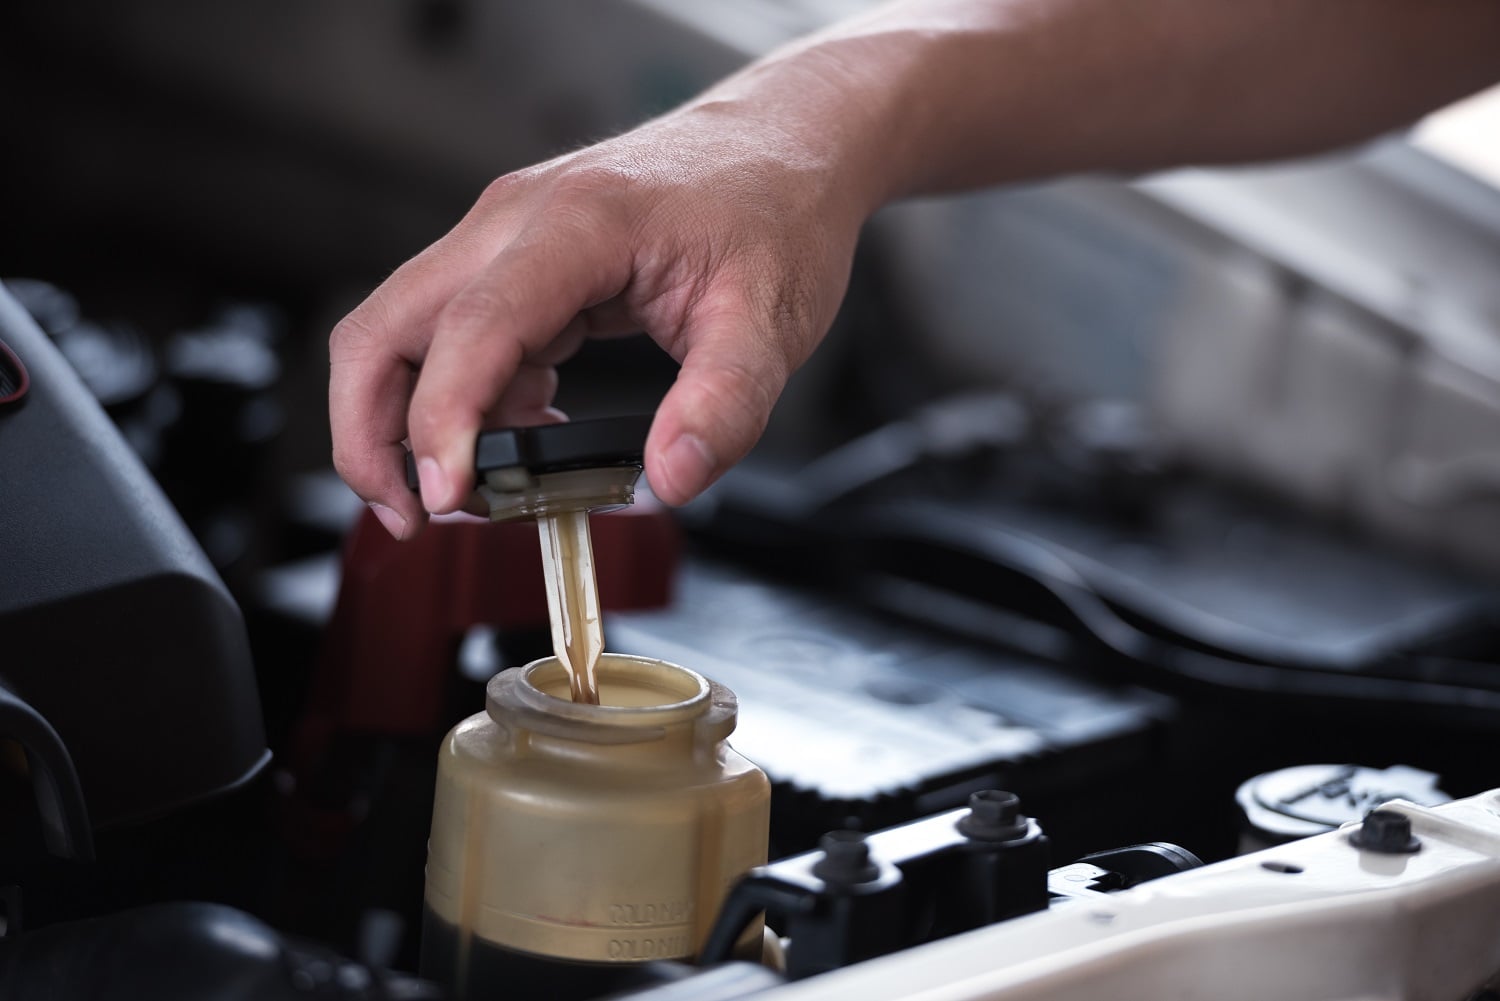 How To Change The Power Steering Fluid